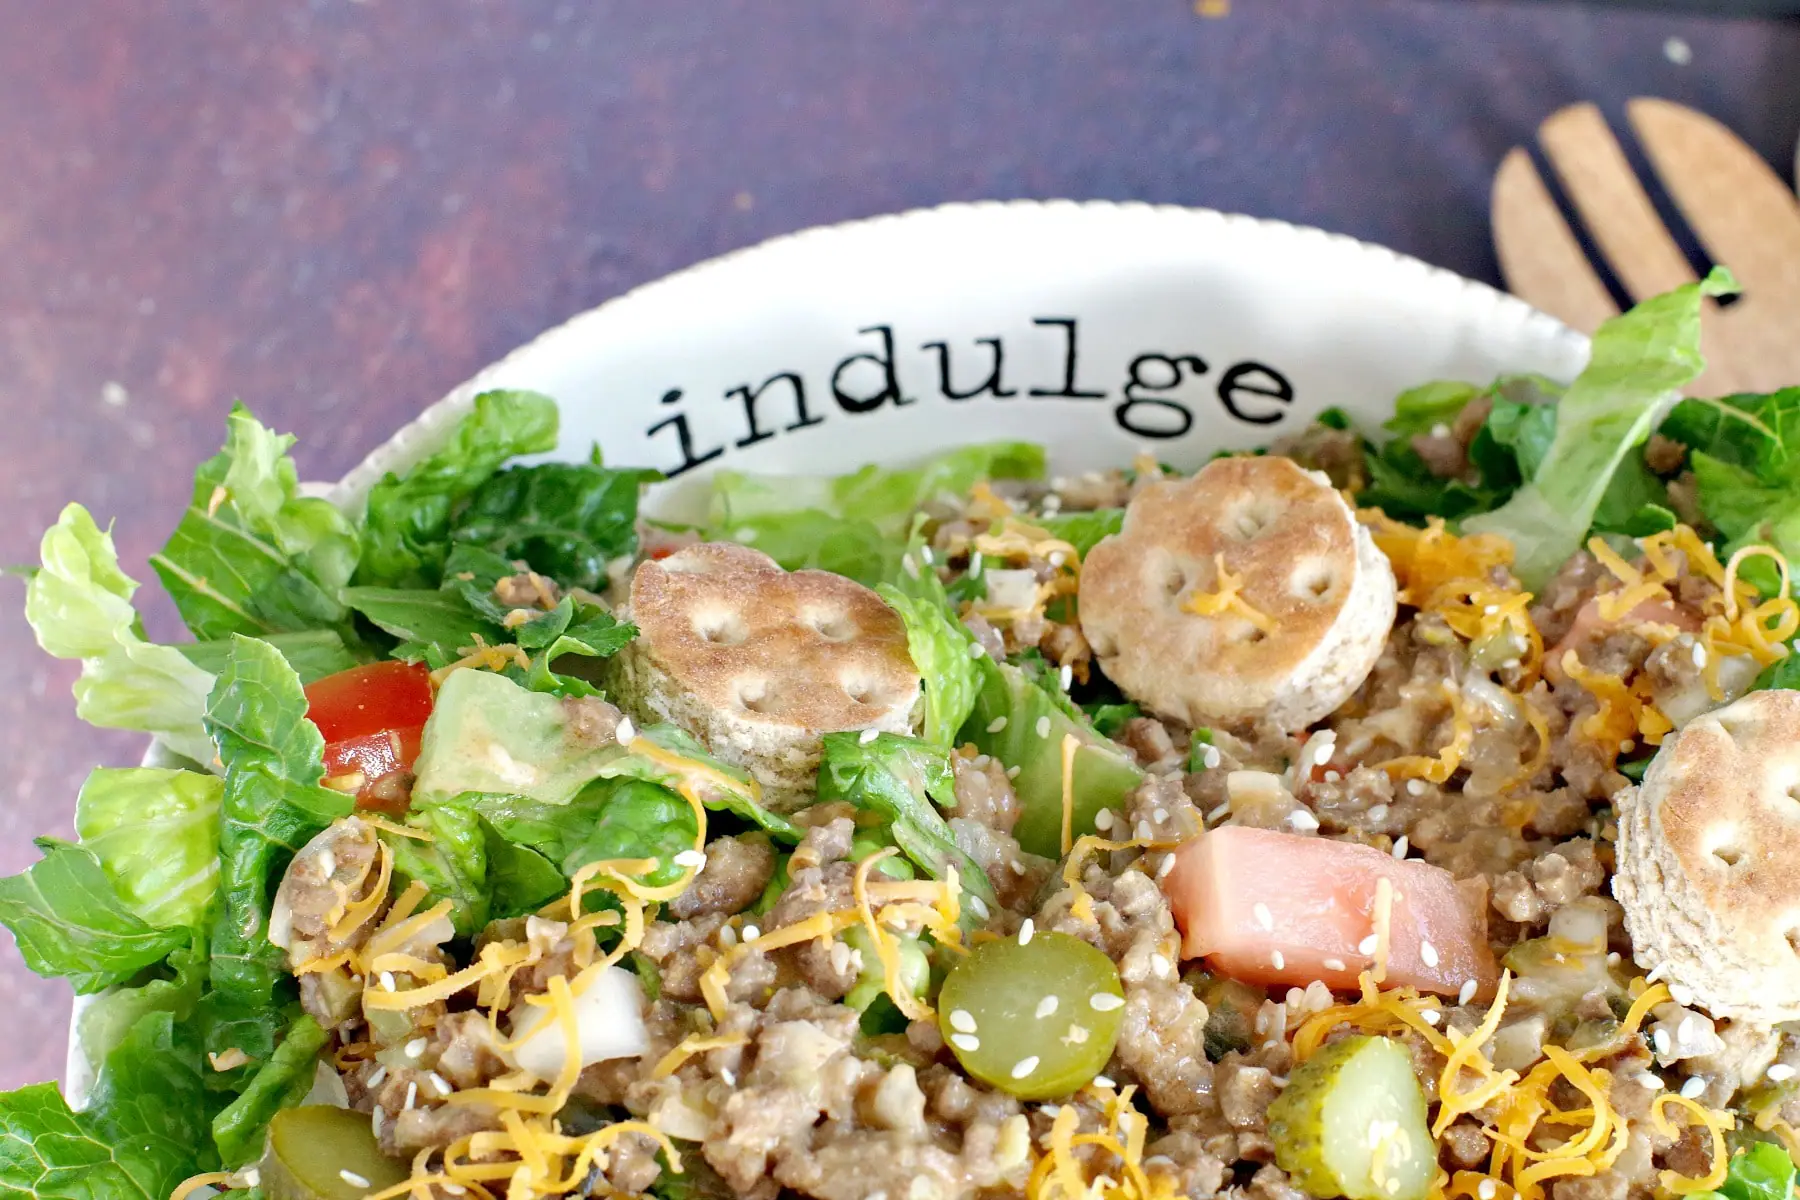 Big Mac salad (from top) in white bowl) with word "indulge" written on bowl